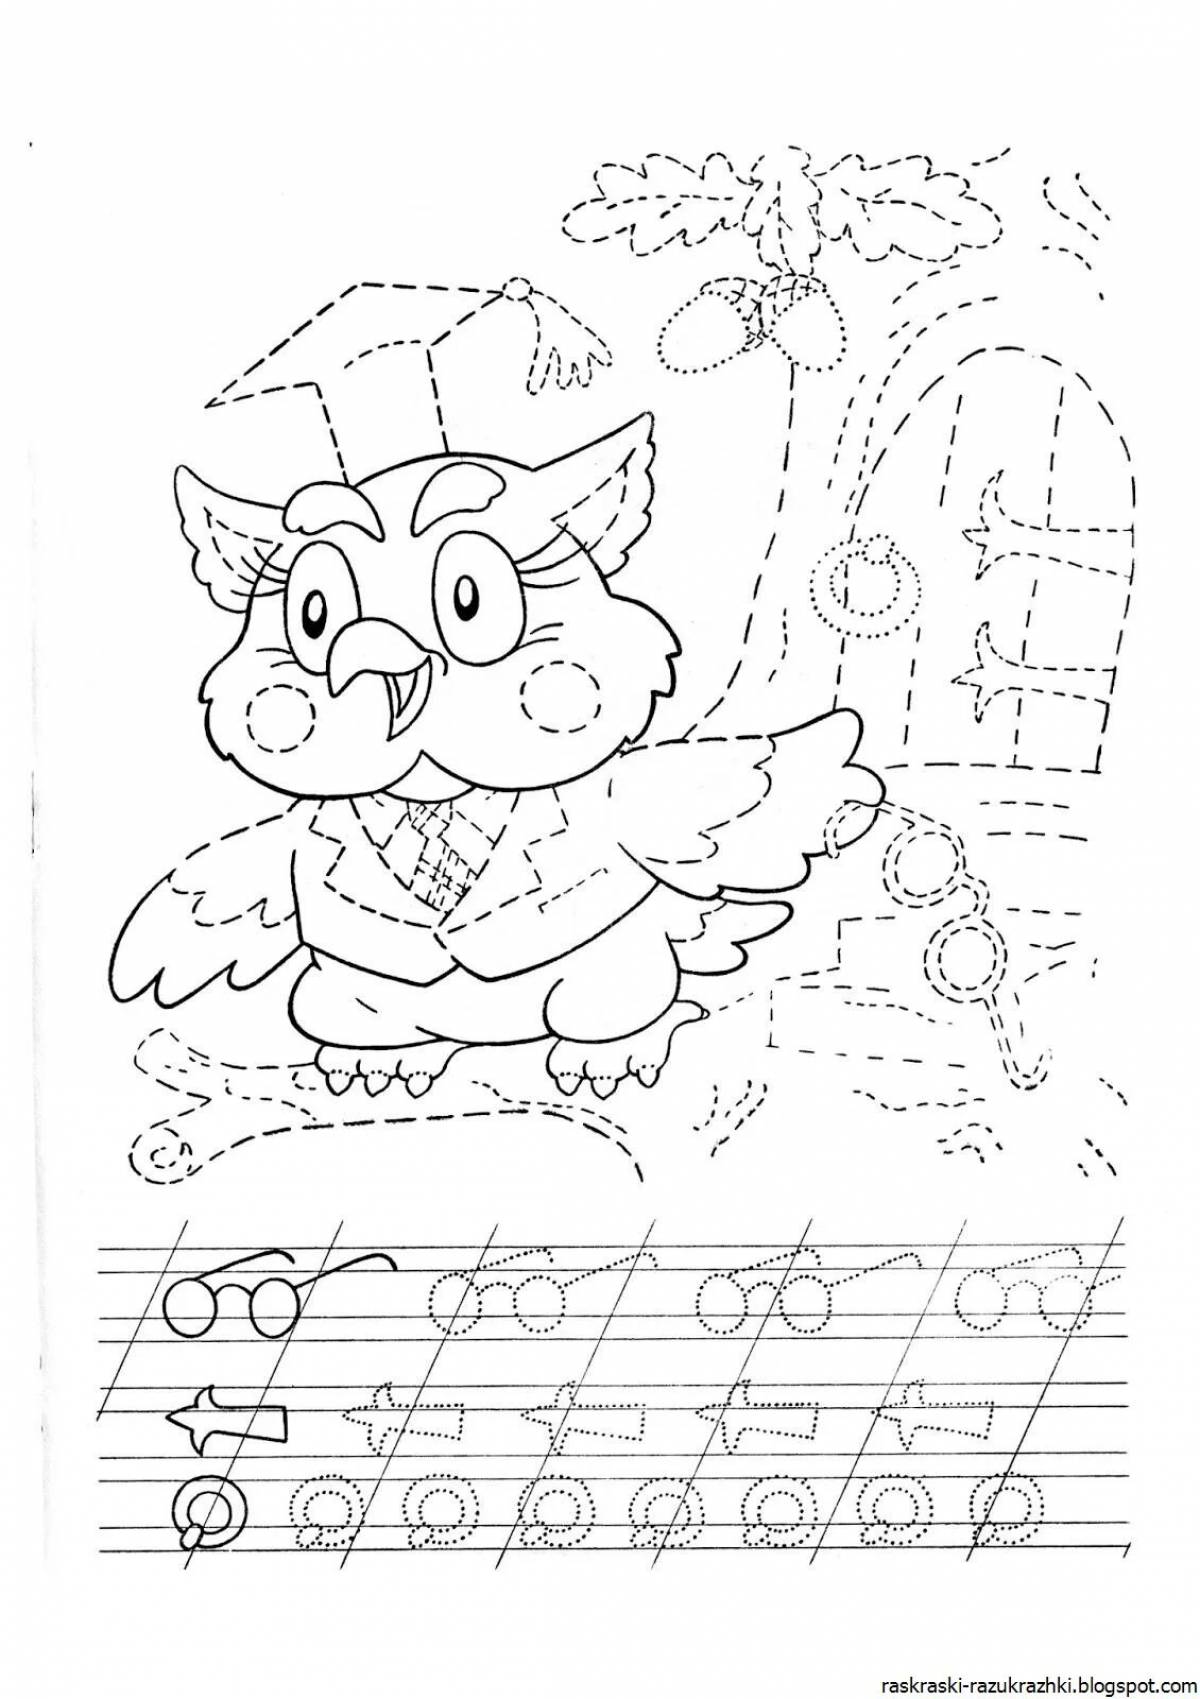 Color-joyful prescription coloring page for children 4-5 years old